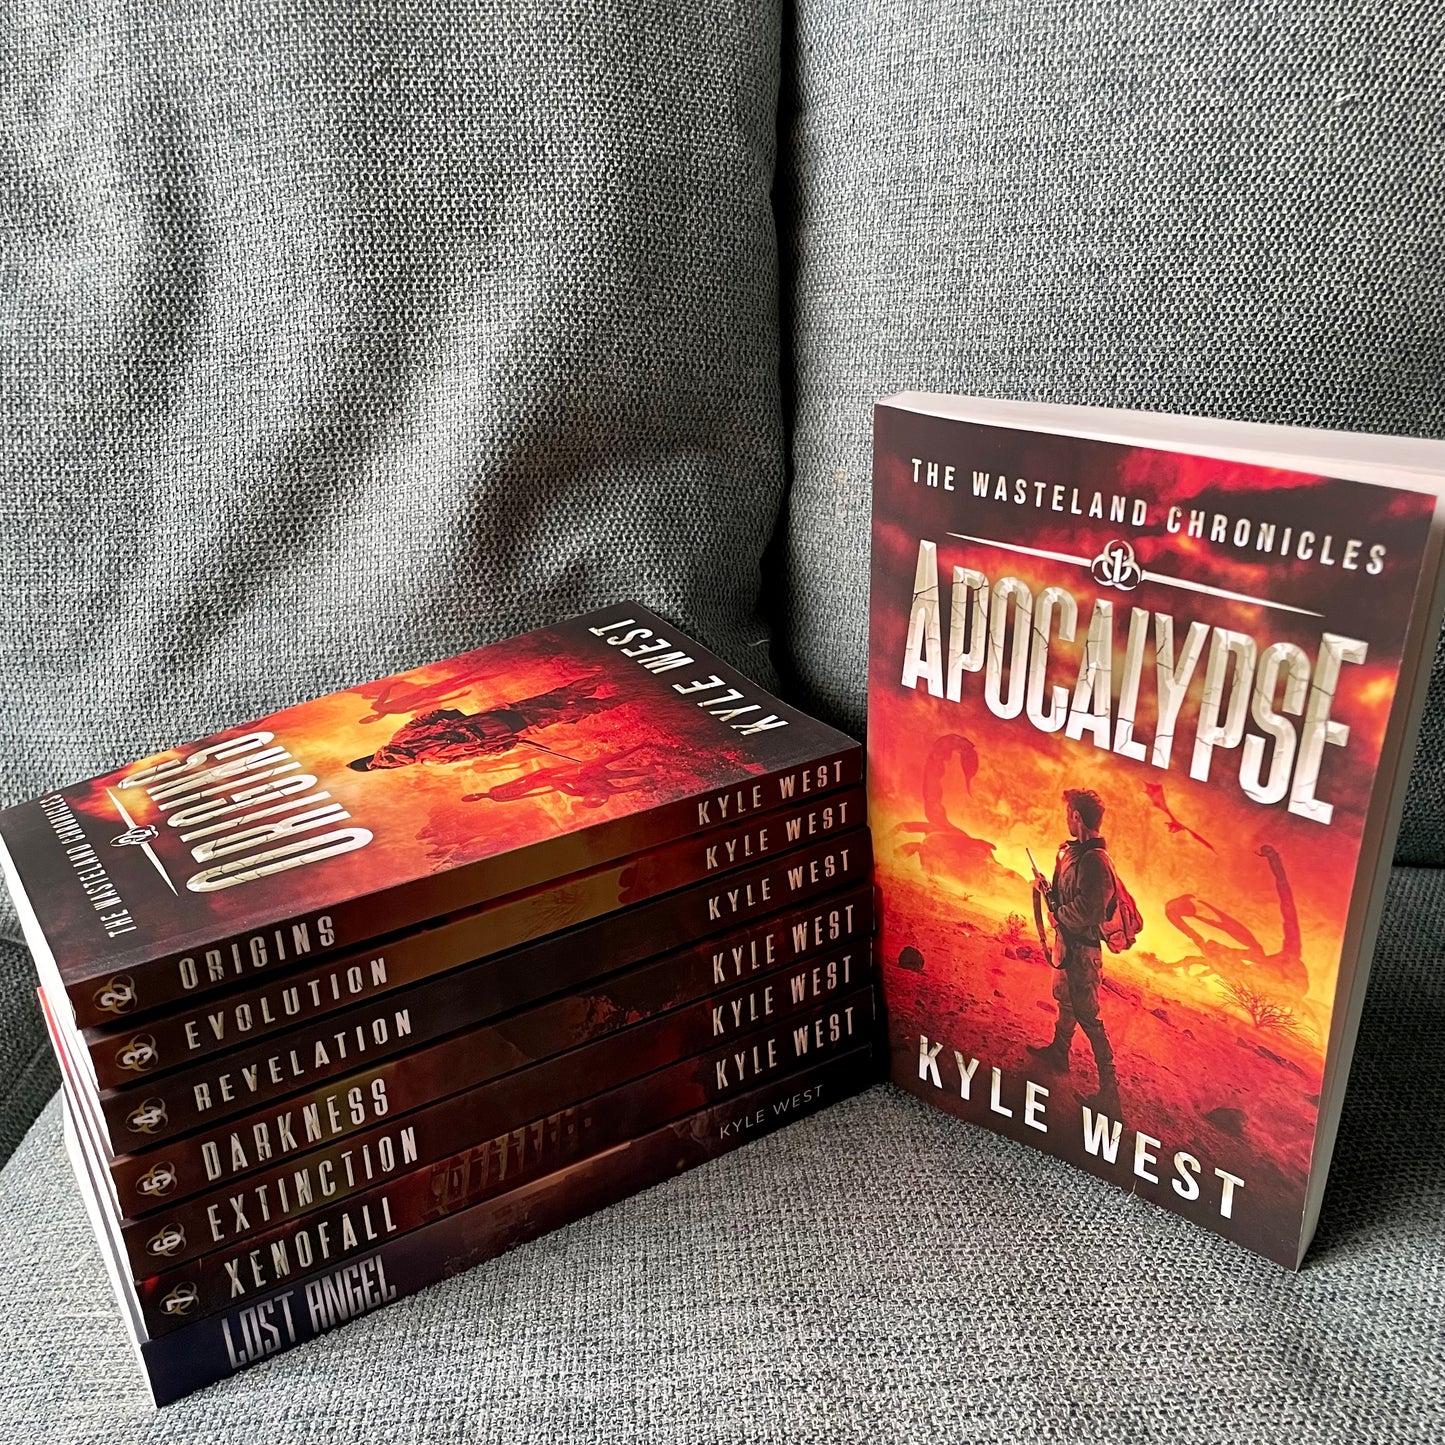 The Wasteland Chronicles: The Complete Signed Paperback Set